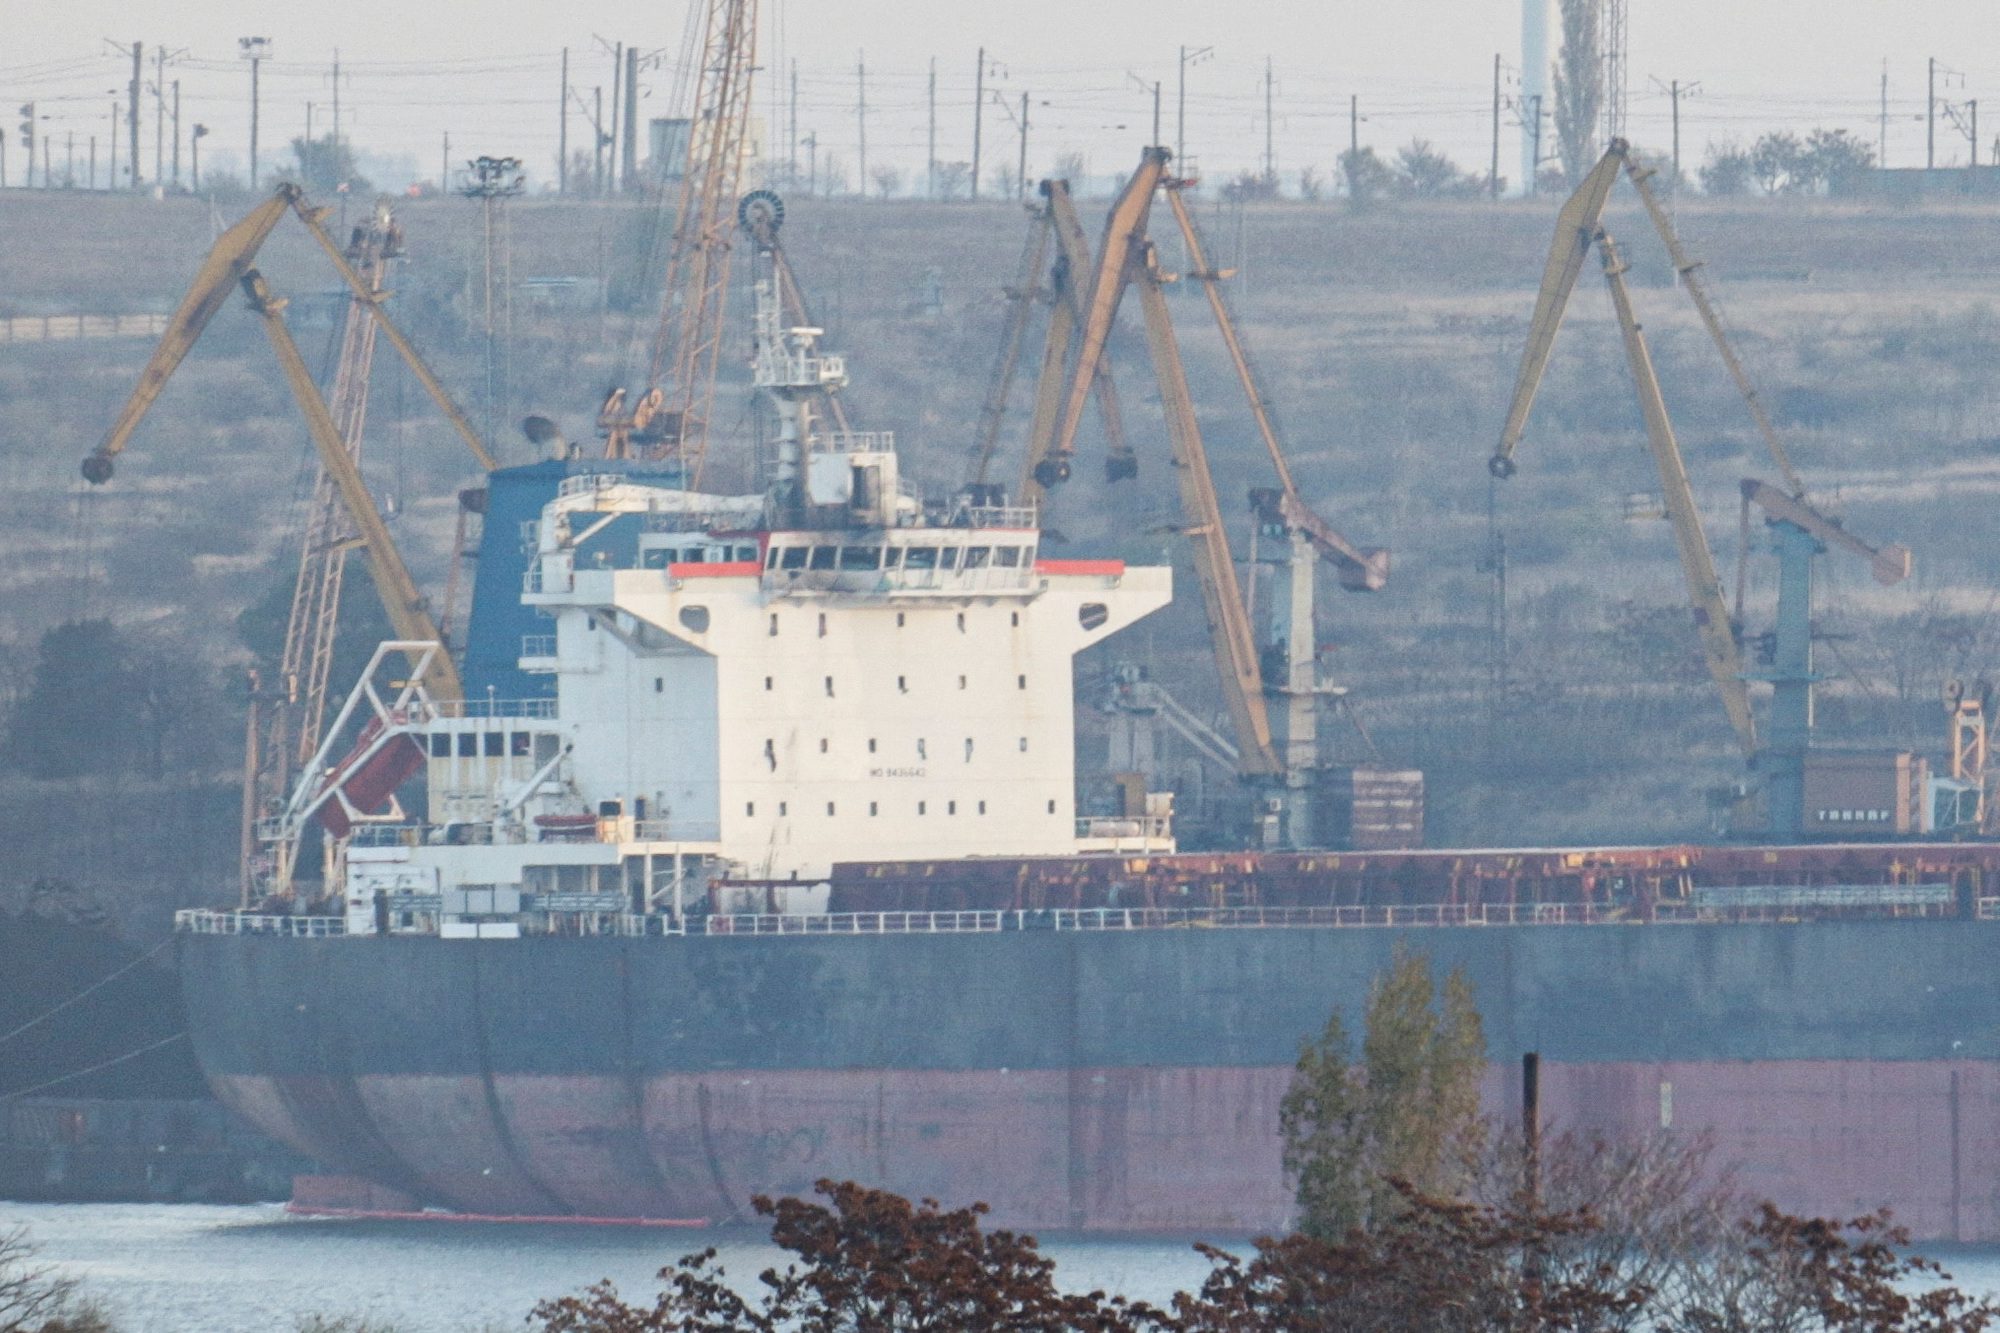 A view shows Liberia-flagged bulk carrier Kmax Ruler damaged by a Russian missile strike in the sea port Pivdennyi, amid Russia's attack on Ukraine, in Odesa region, Ukraine November 9, 2023. REUTERS/Stringer